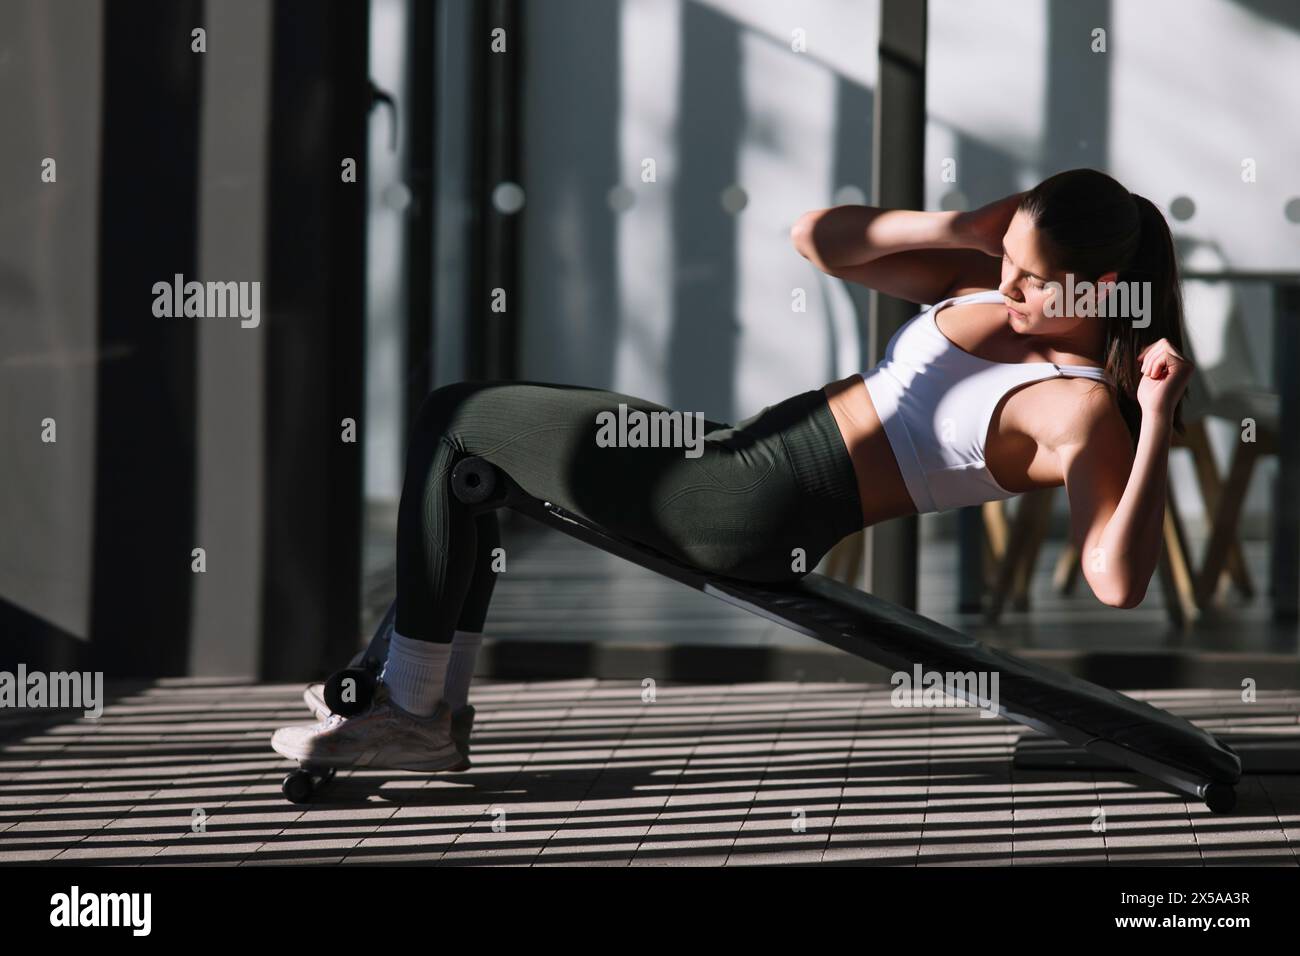 A focused female athlete performs abdominal exercises at home, showcasing a healthy and active lifestyle Stock Photo